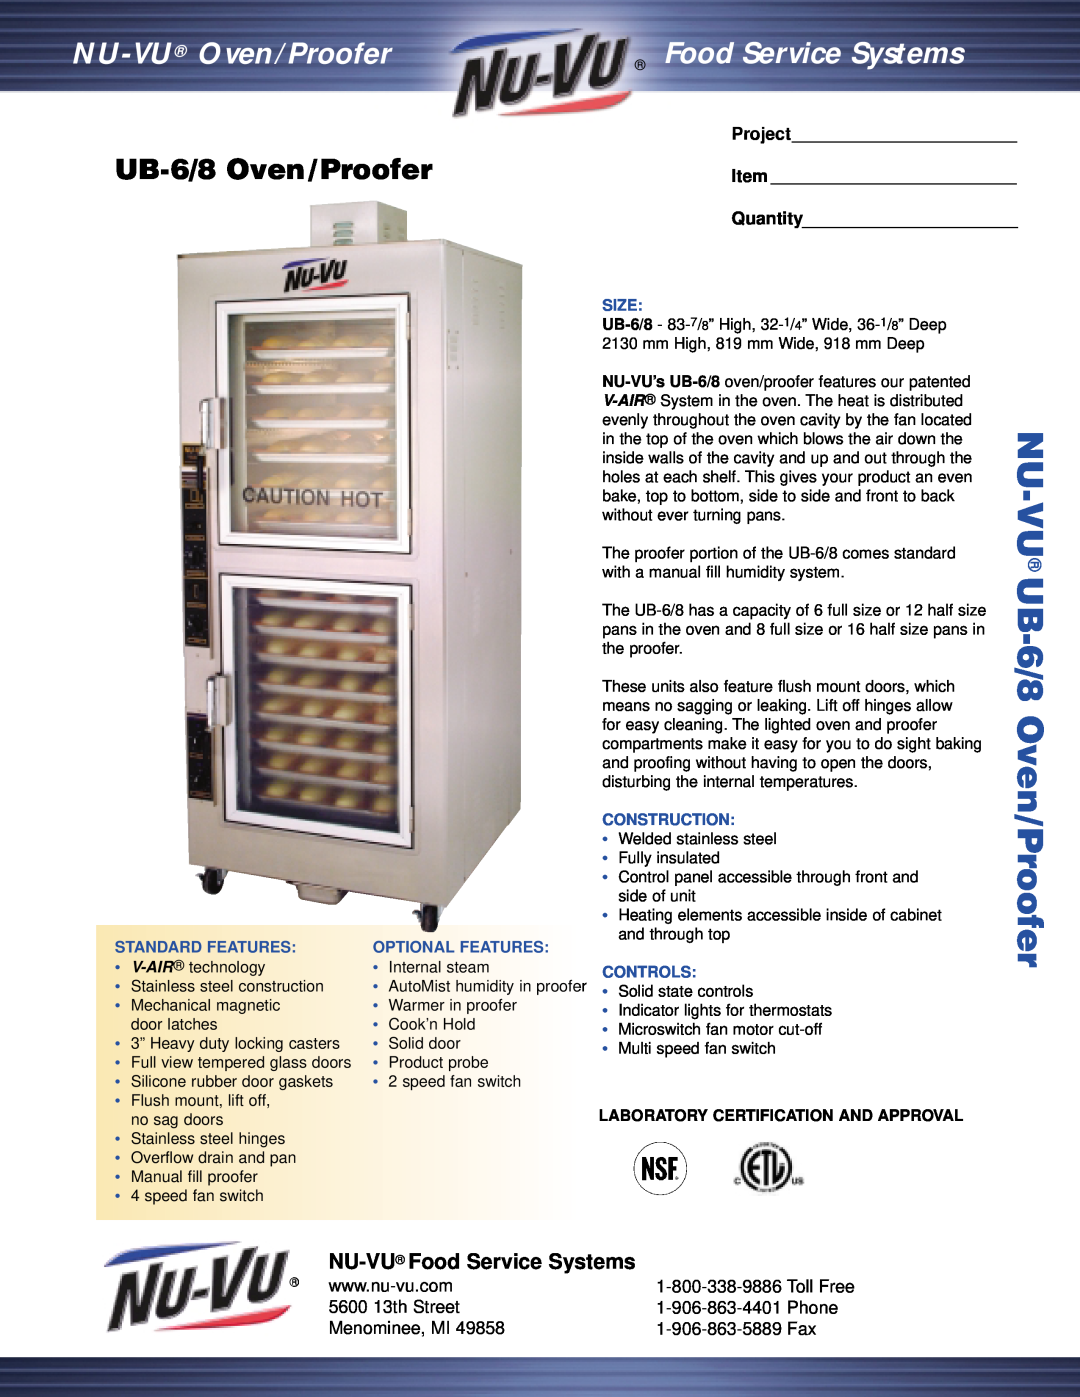 Middleby Cooking Systems Group manual UB-6/8Oven/Proofer, NU-VU Food Service Systems, 5600 13th Street, Phone, Project 